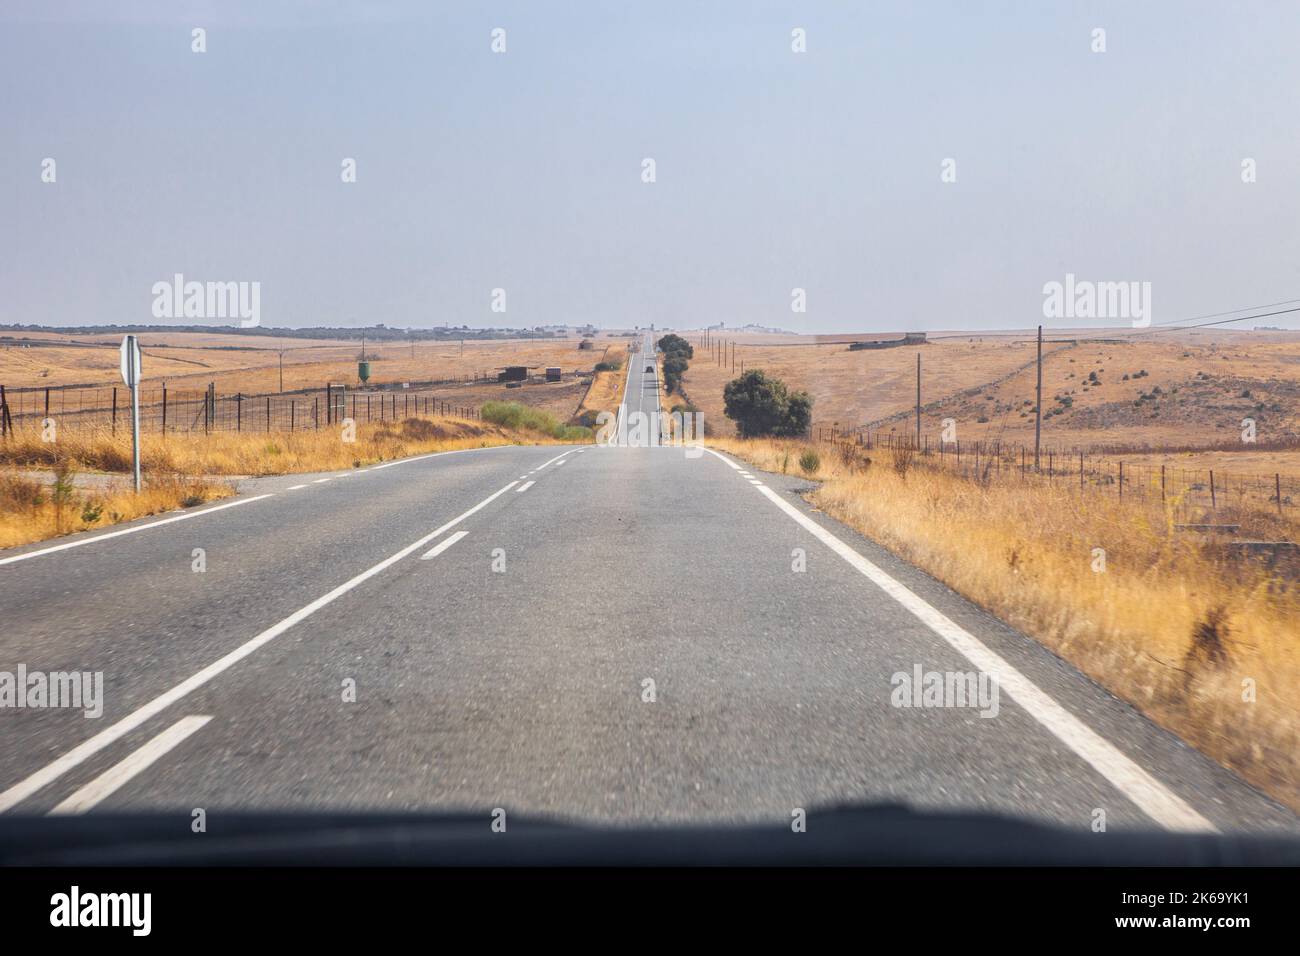 Local road with constant grade changes. View from inside car Stock Photo